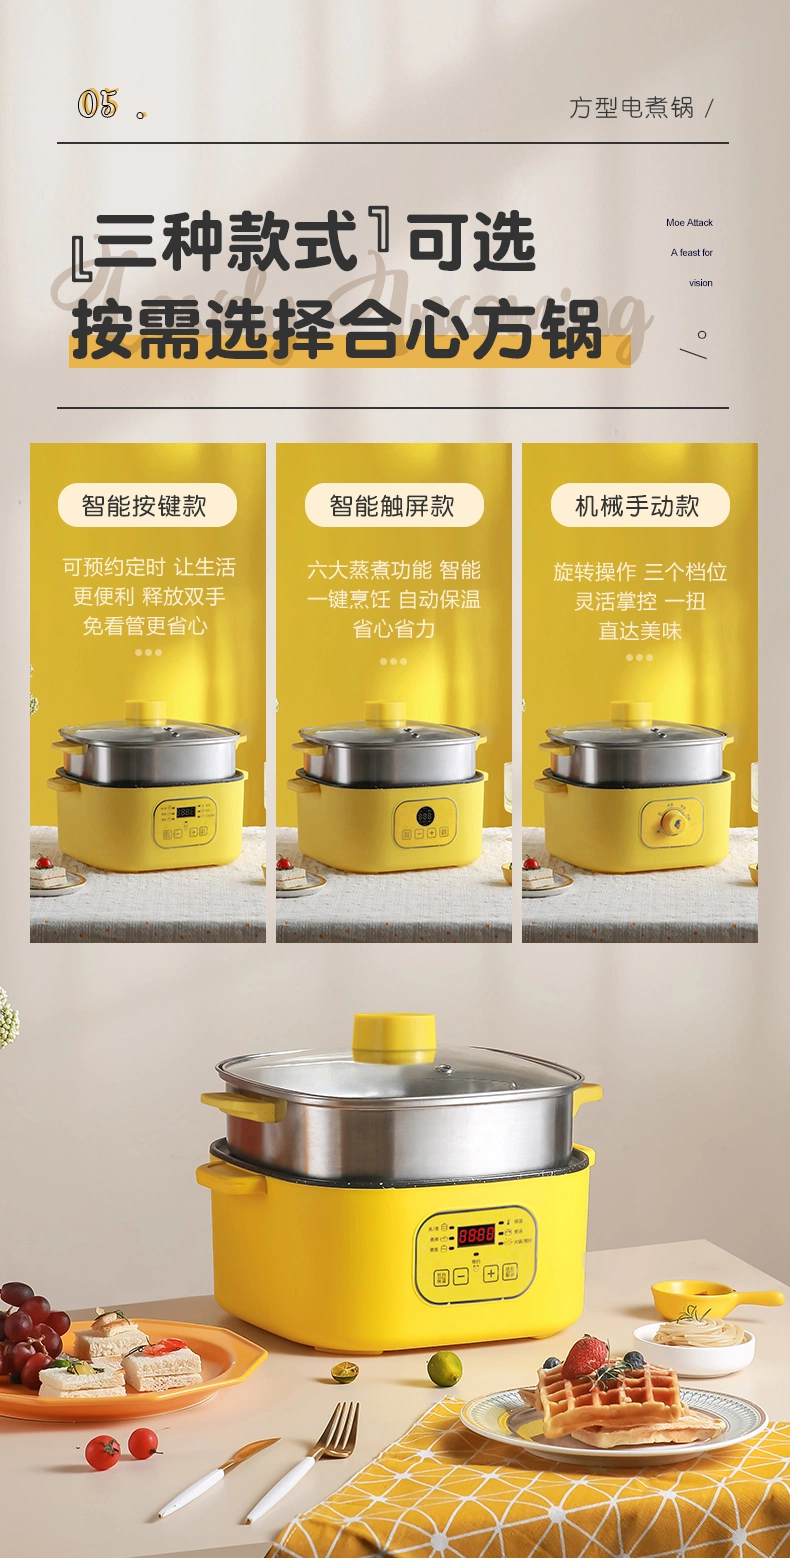 Xbc-30 Square Double Mechanical Single-Layer Electric Cooking Pot, Electric Steamer, Electric Frying Pan